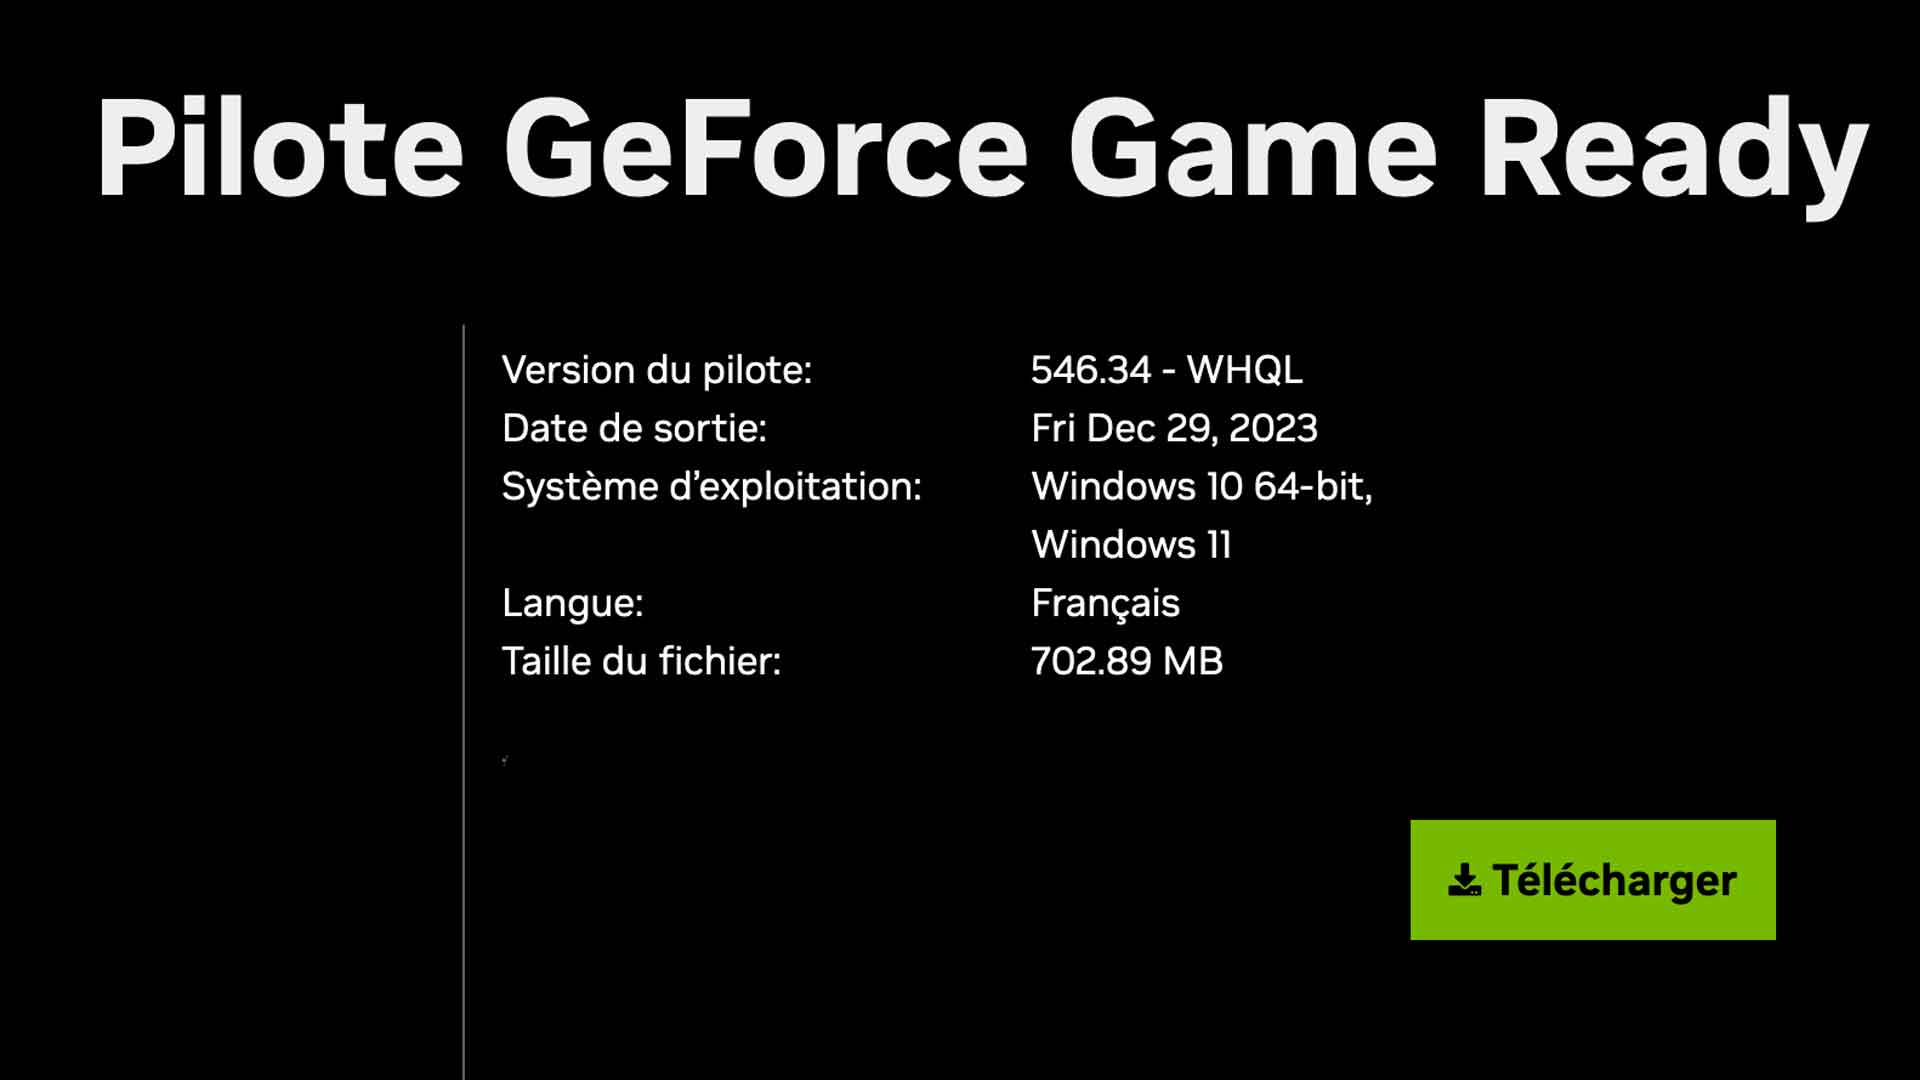 Pilotes graphiques Nvidia GeForce 546.34 WHQL Game Ready